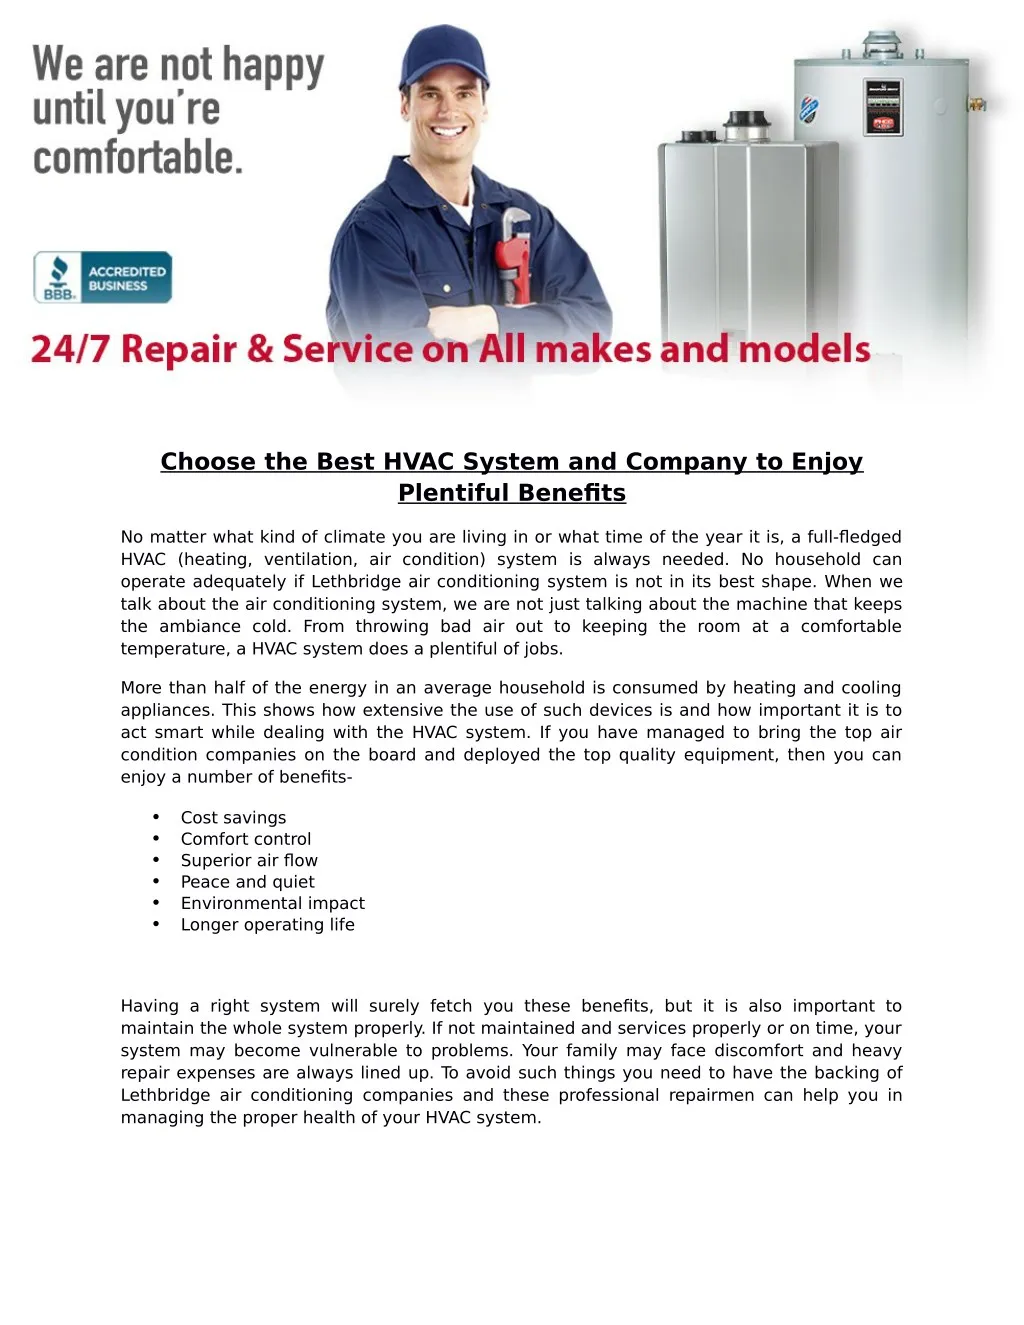 choose the best hvac system and company to enjoy